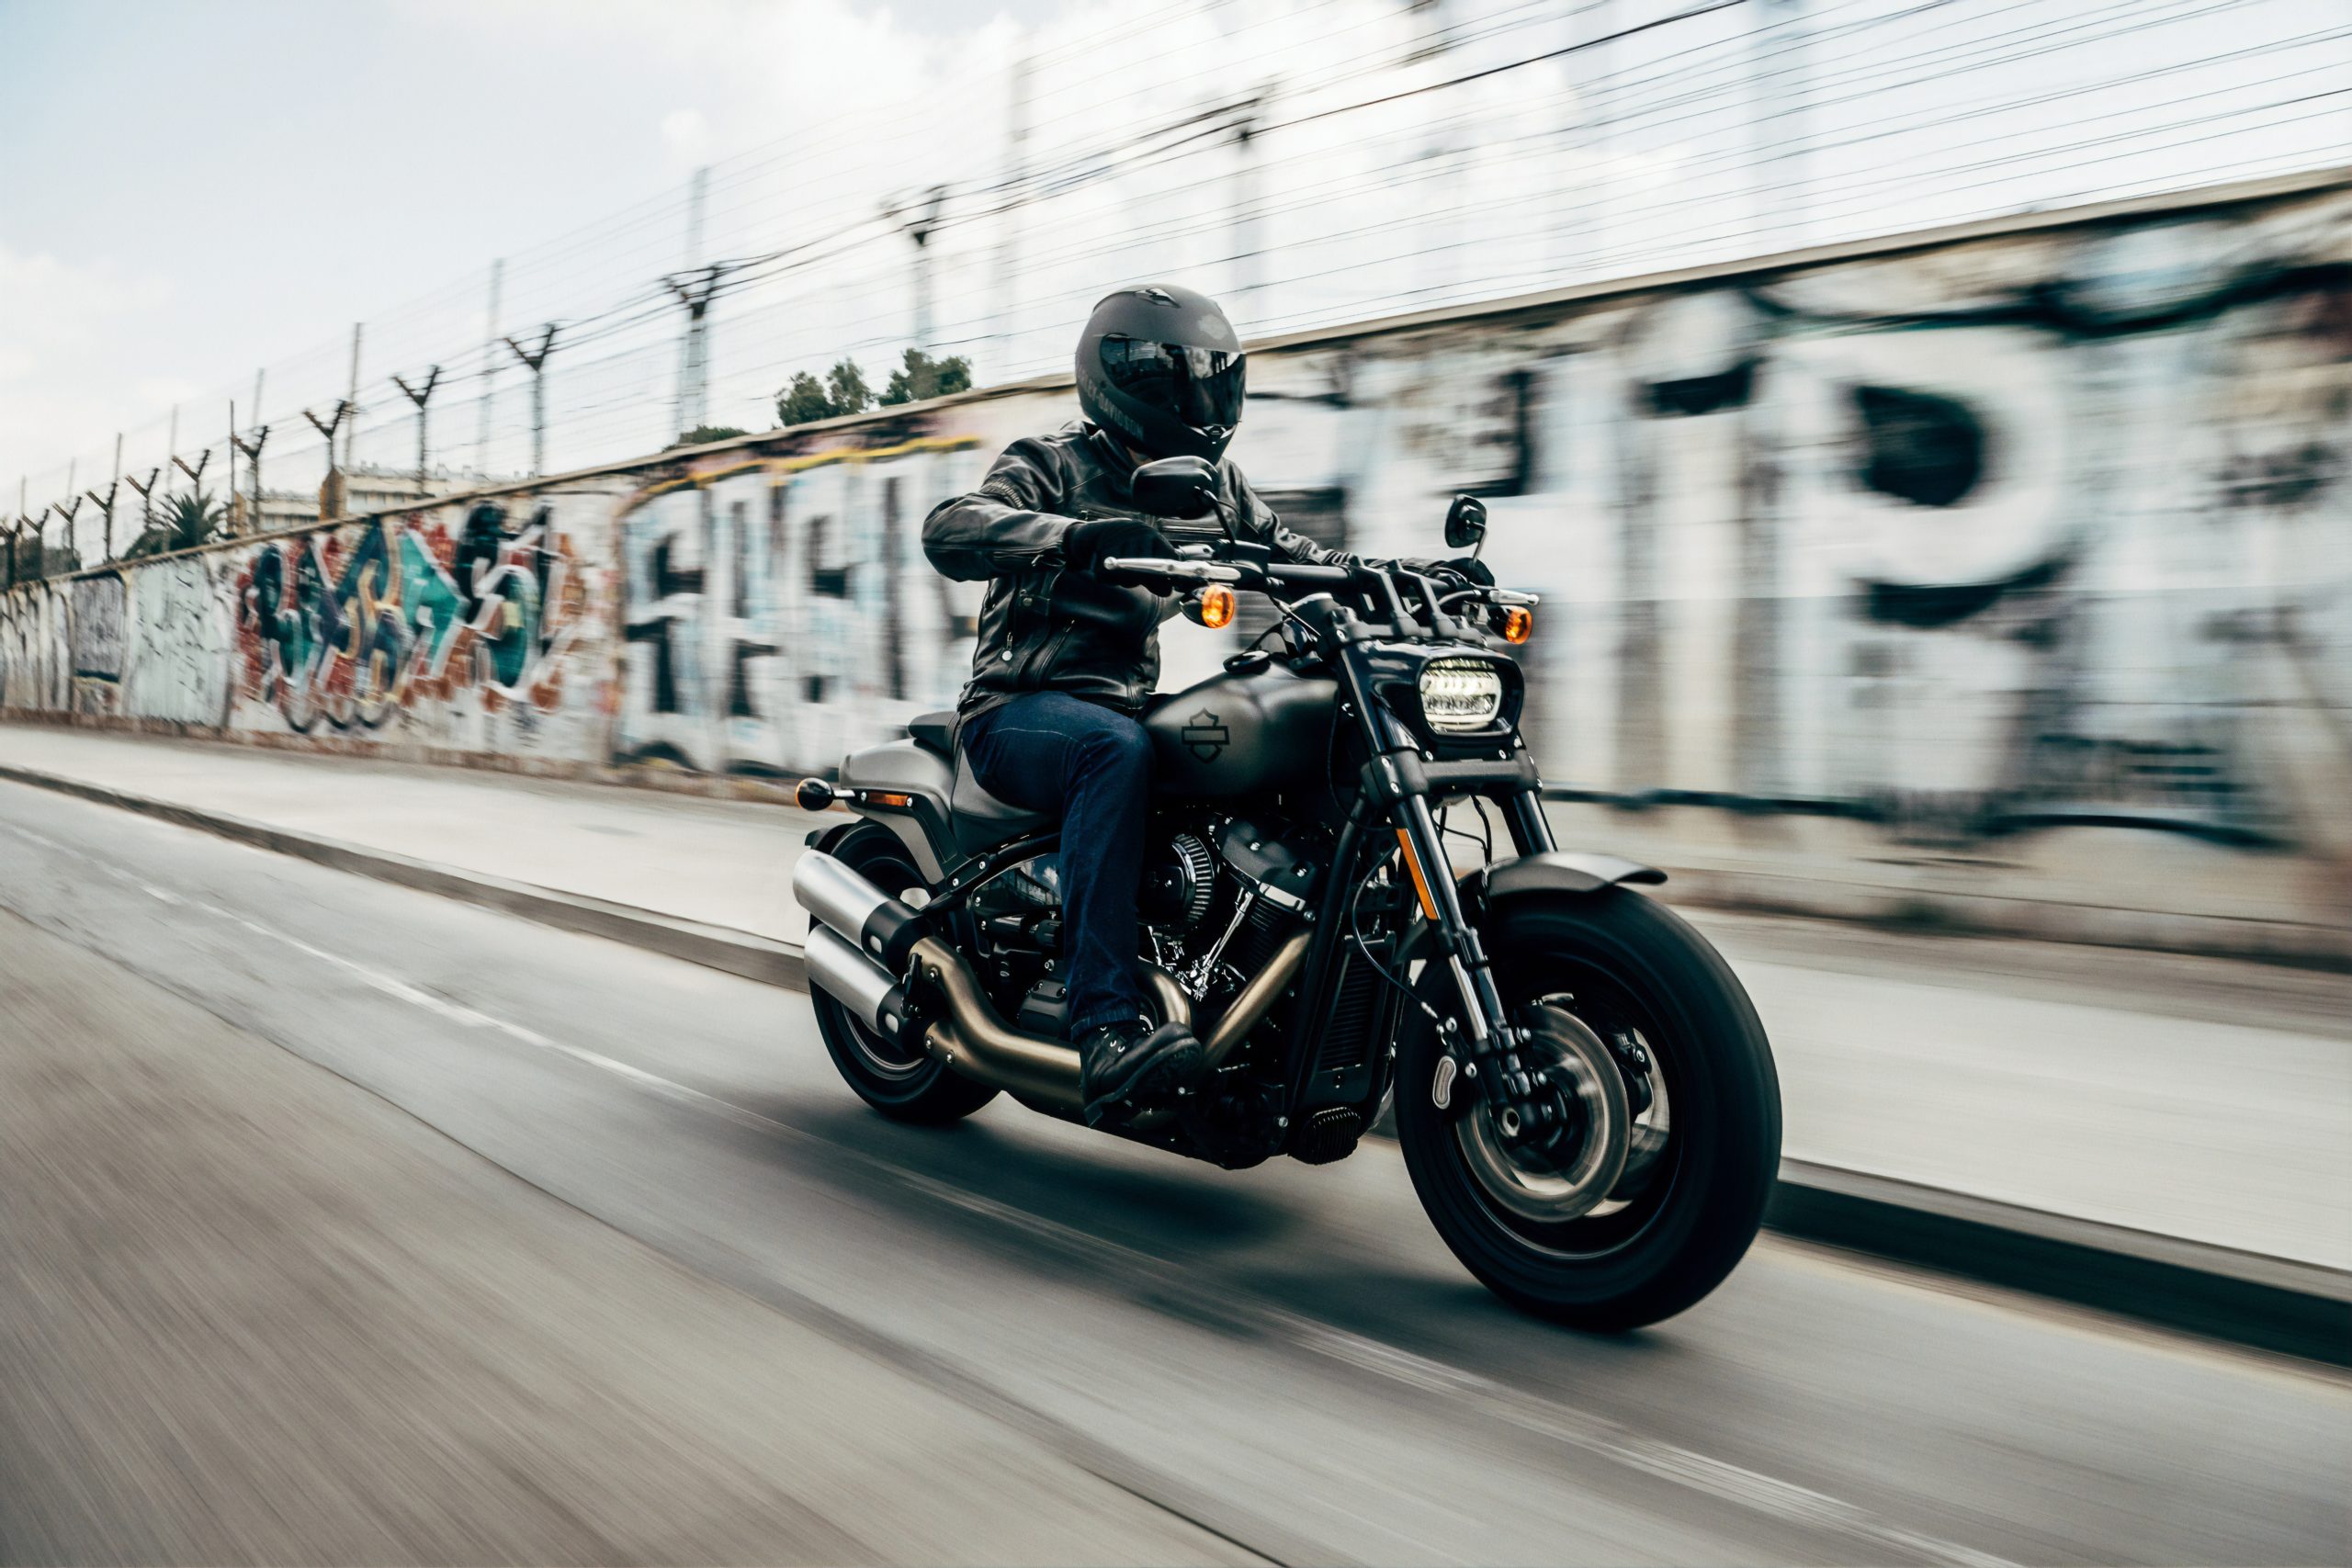 Where to Look for Best Motorcycle Riding Gear?